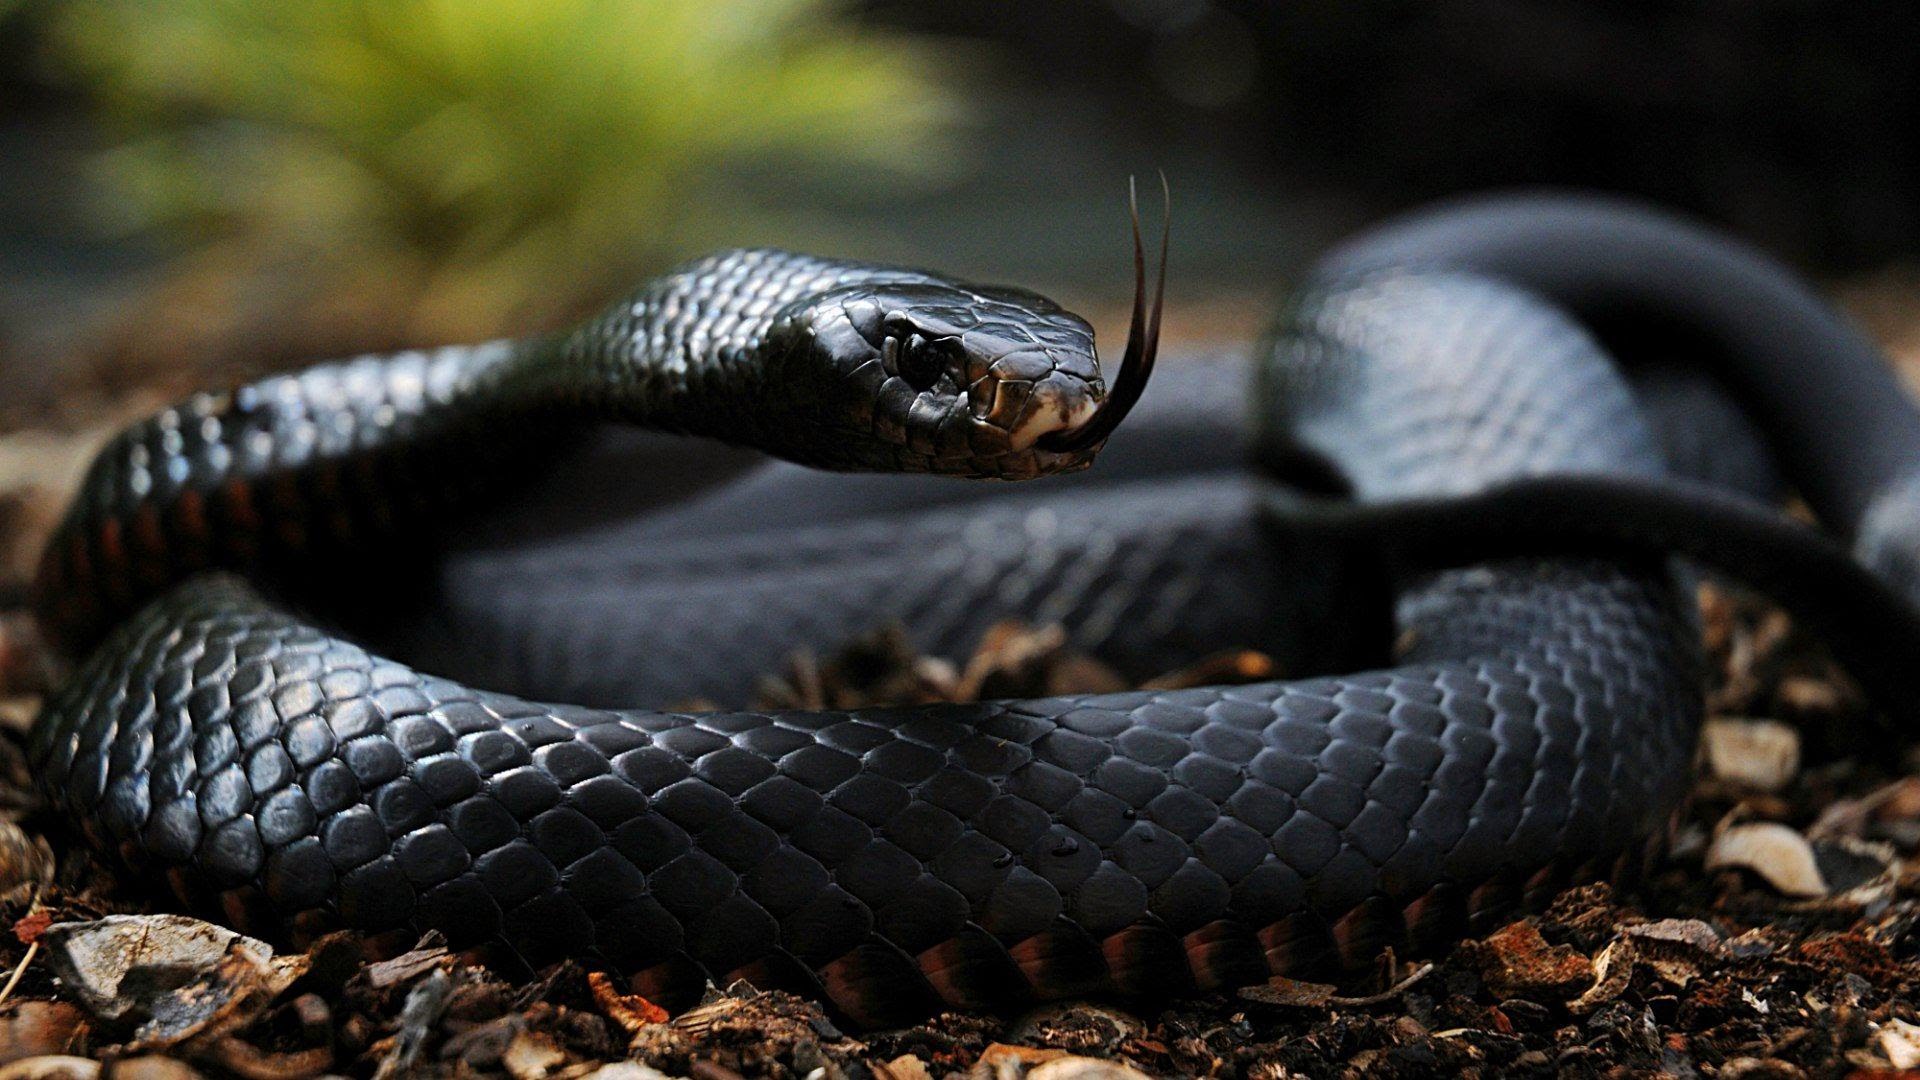 10 most dangerous snakes in the world